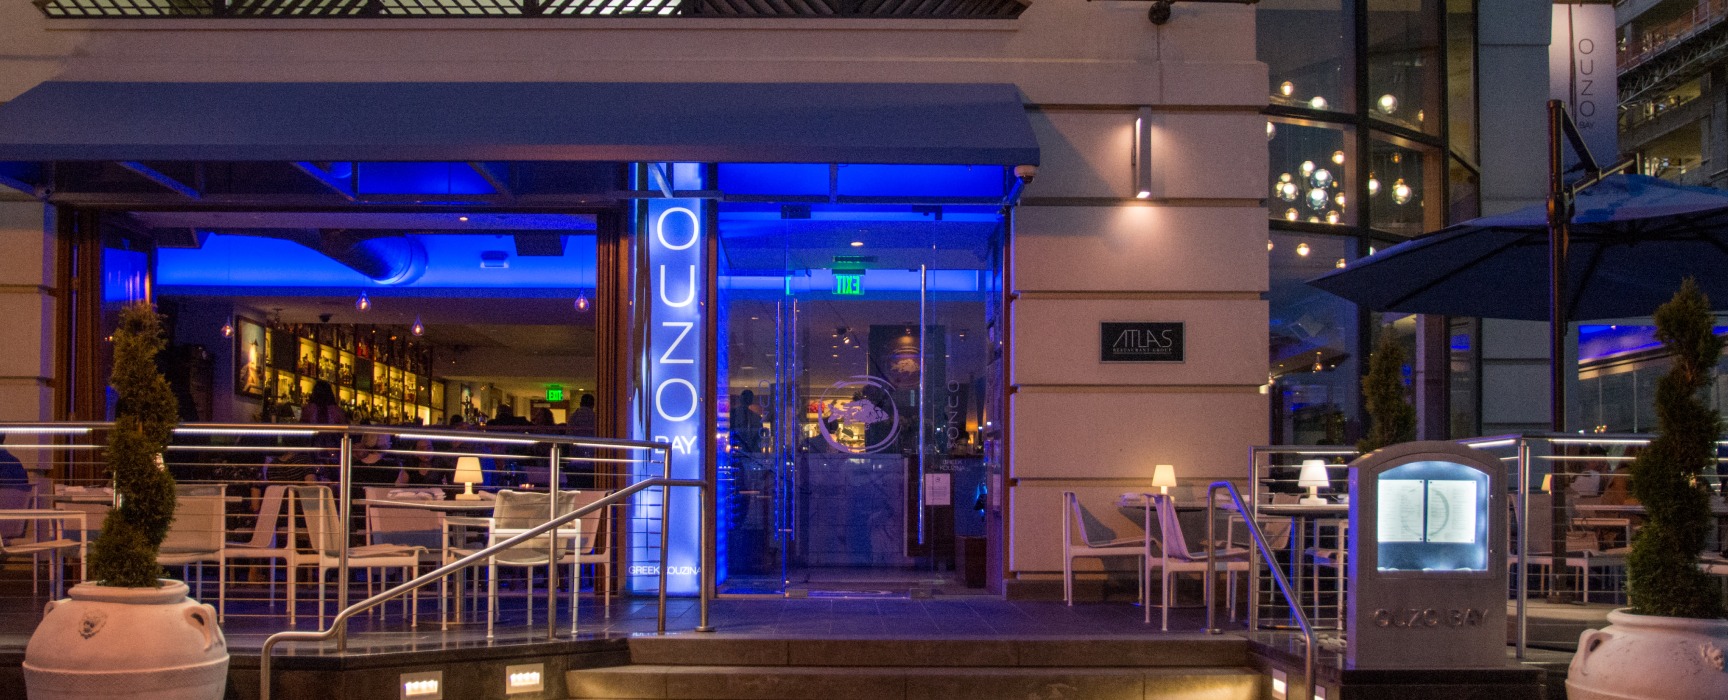 Wide angle nighttime exterior of Ouzo Bay restaurant-front, with inviting blue lighting